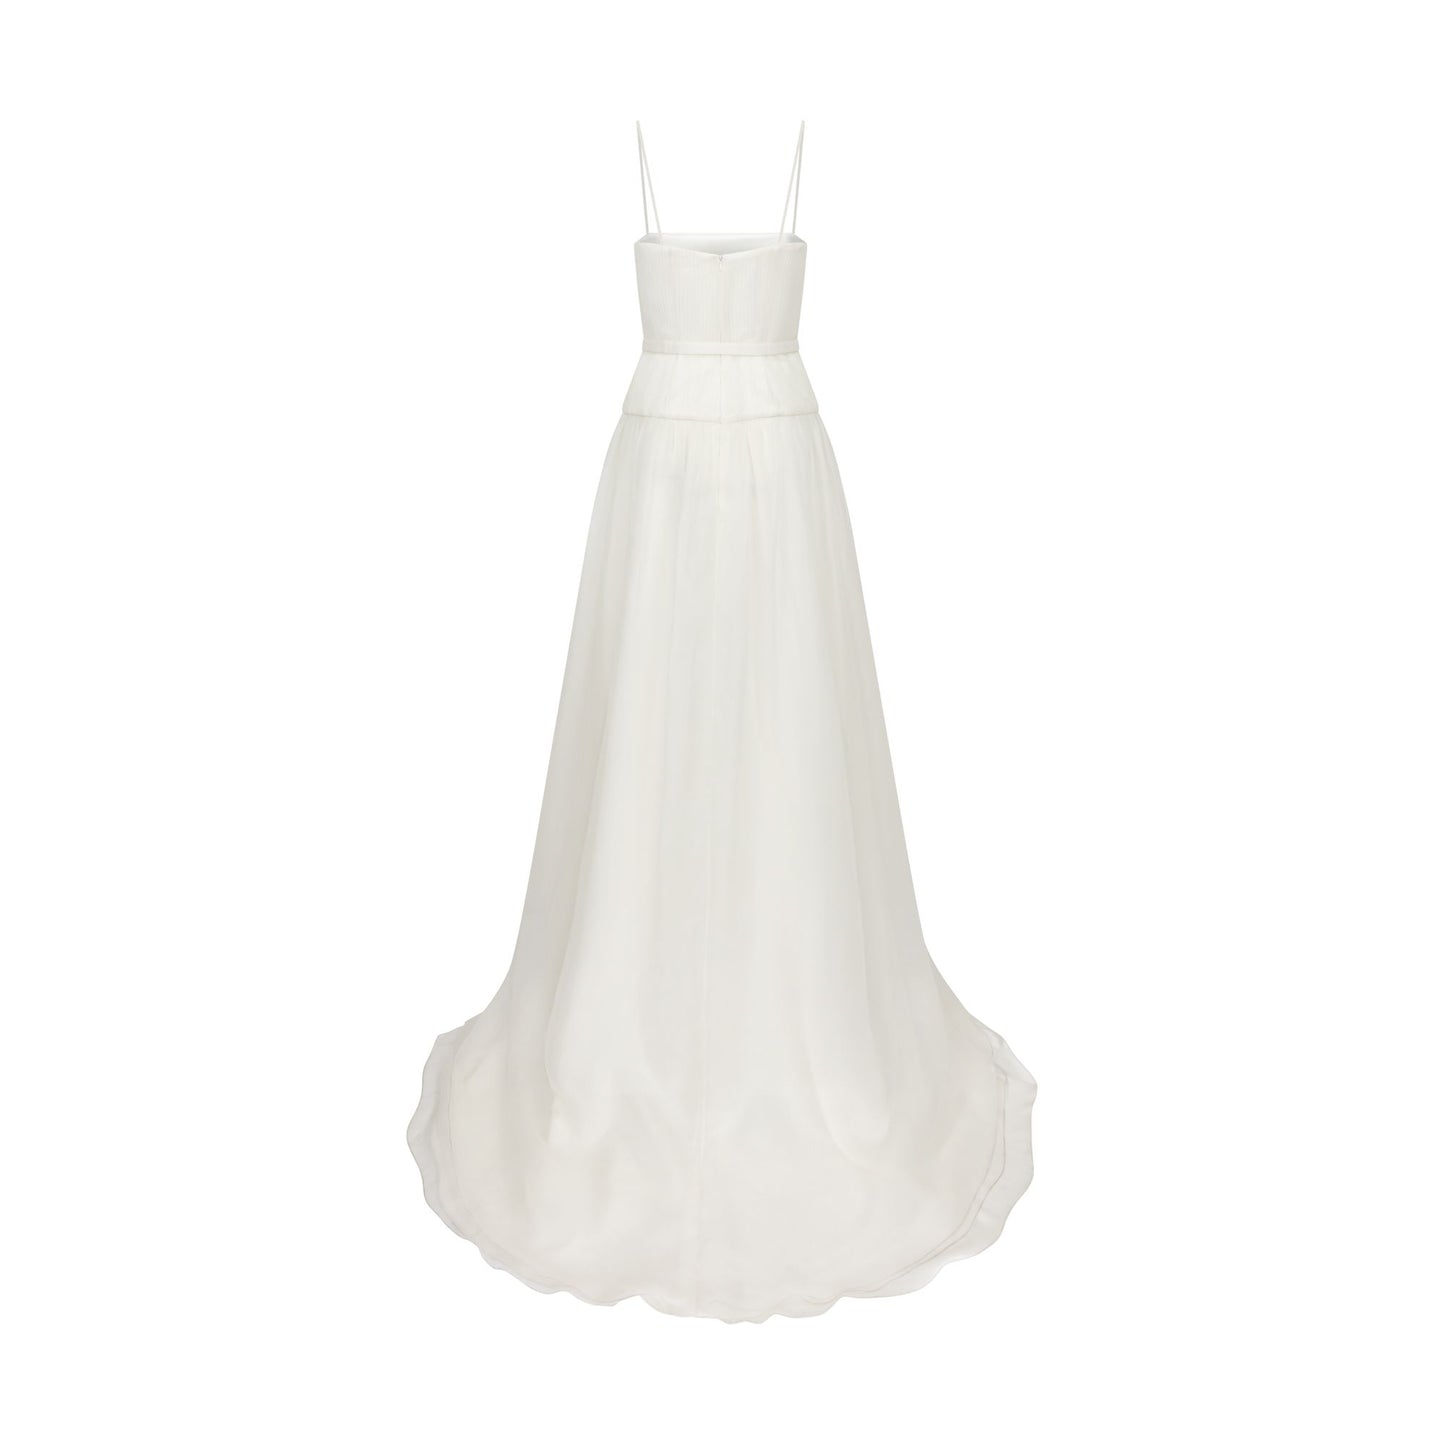 STYLE 095 // PLEATED ORGANZA GOWN WITH DROP WAIST